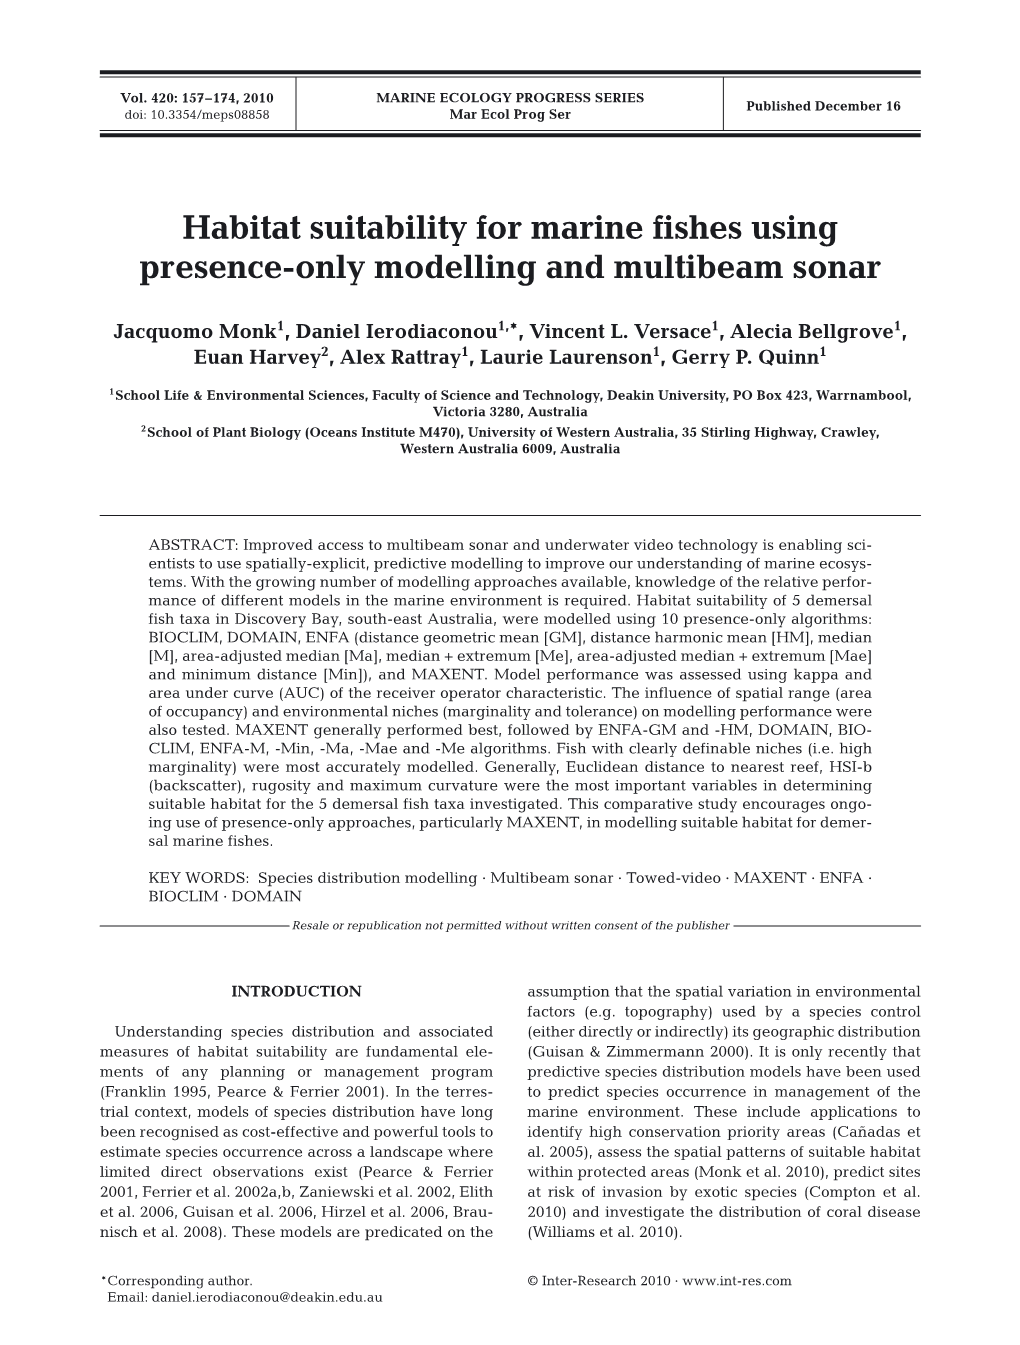 Habitat Suitability for Marine Fishes Using Presence-Only Modelling and Multibeam Sonar